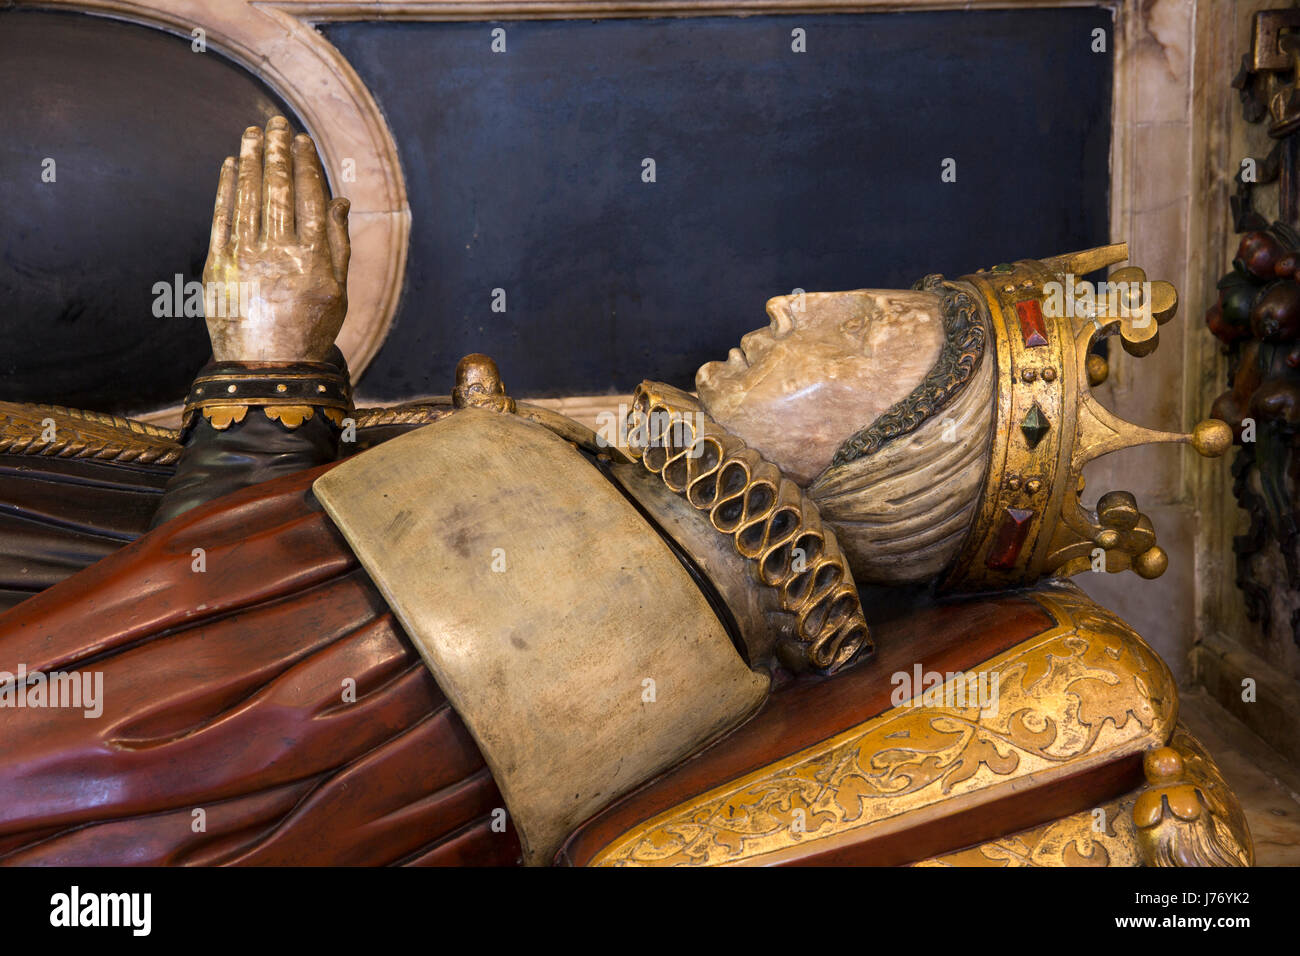 UK, England, Derbyshire, Derby, Iron Gate, Cathedral, Bess of Hardwick’s1608 memorial, crowned head and hands of effigy in prayer Stock Photo